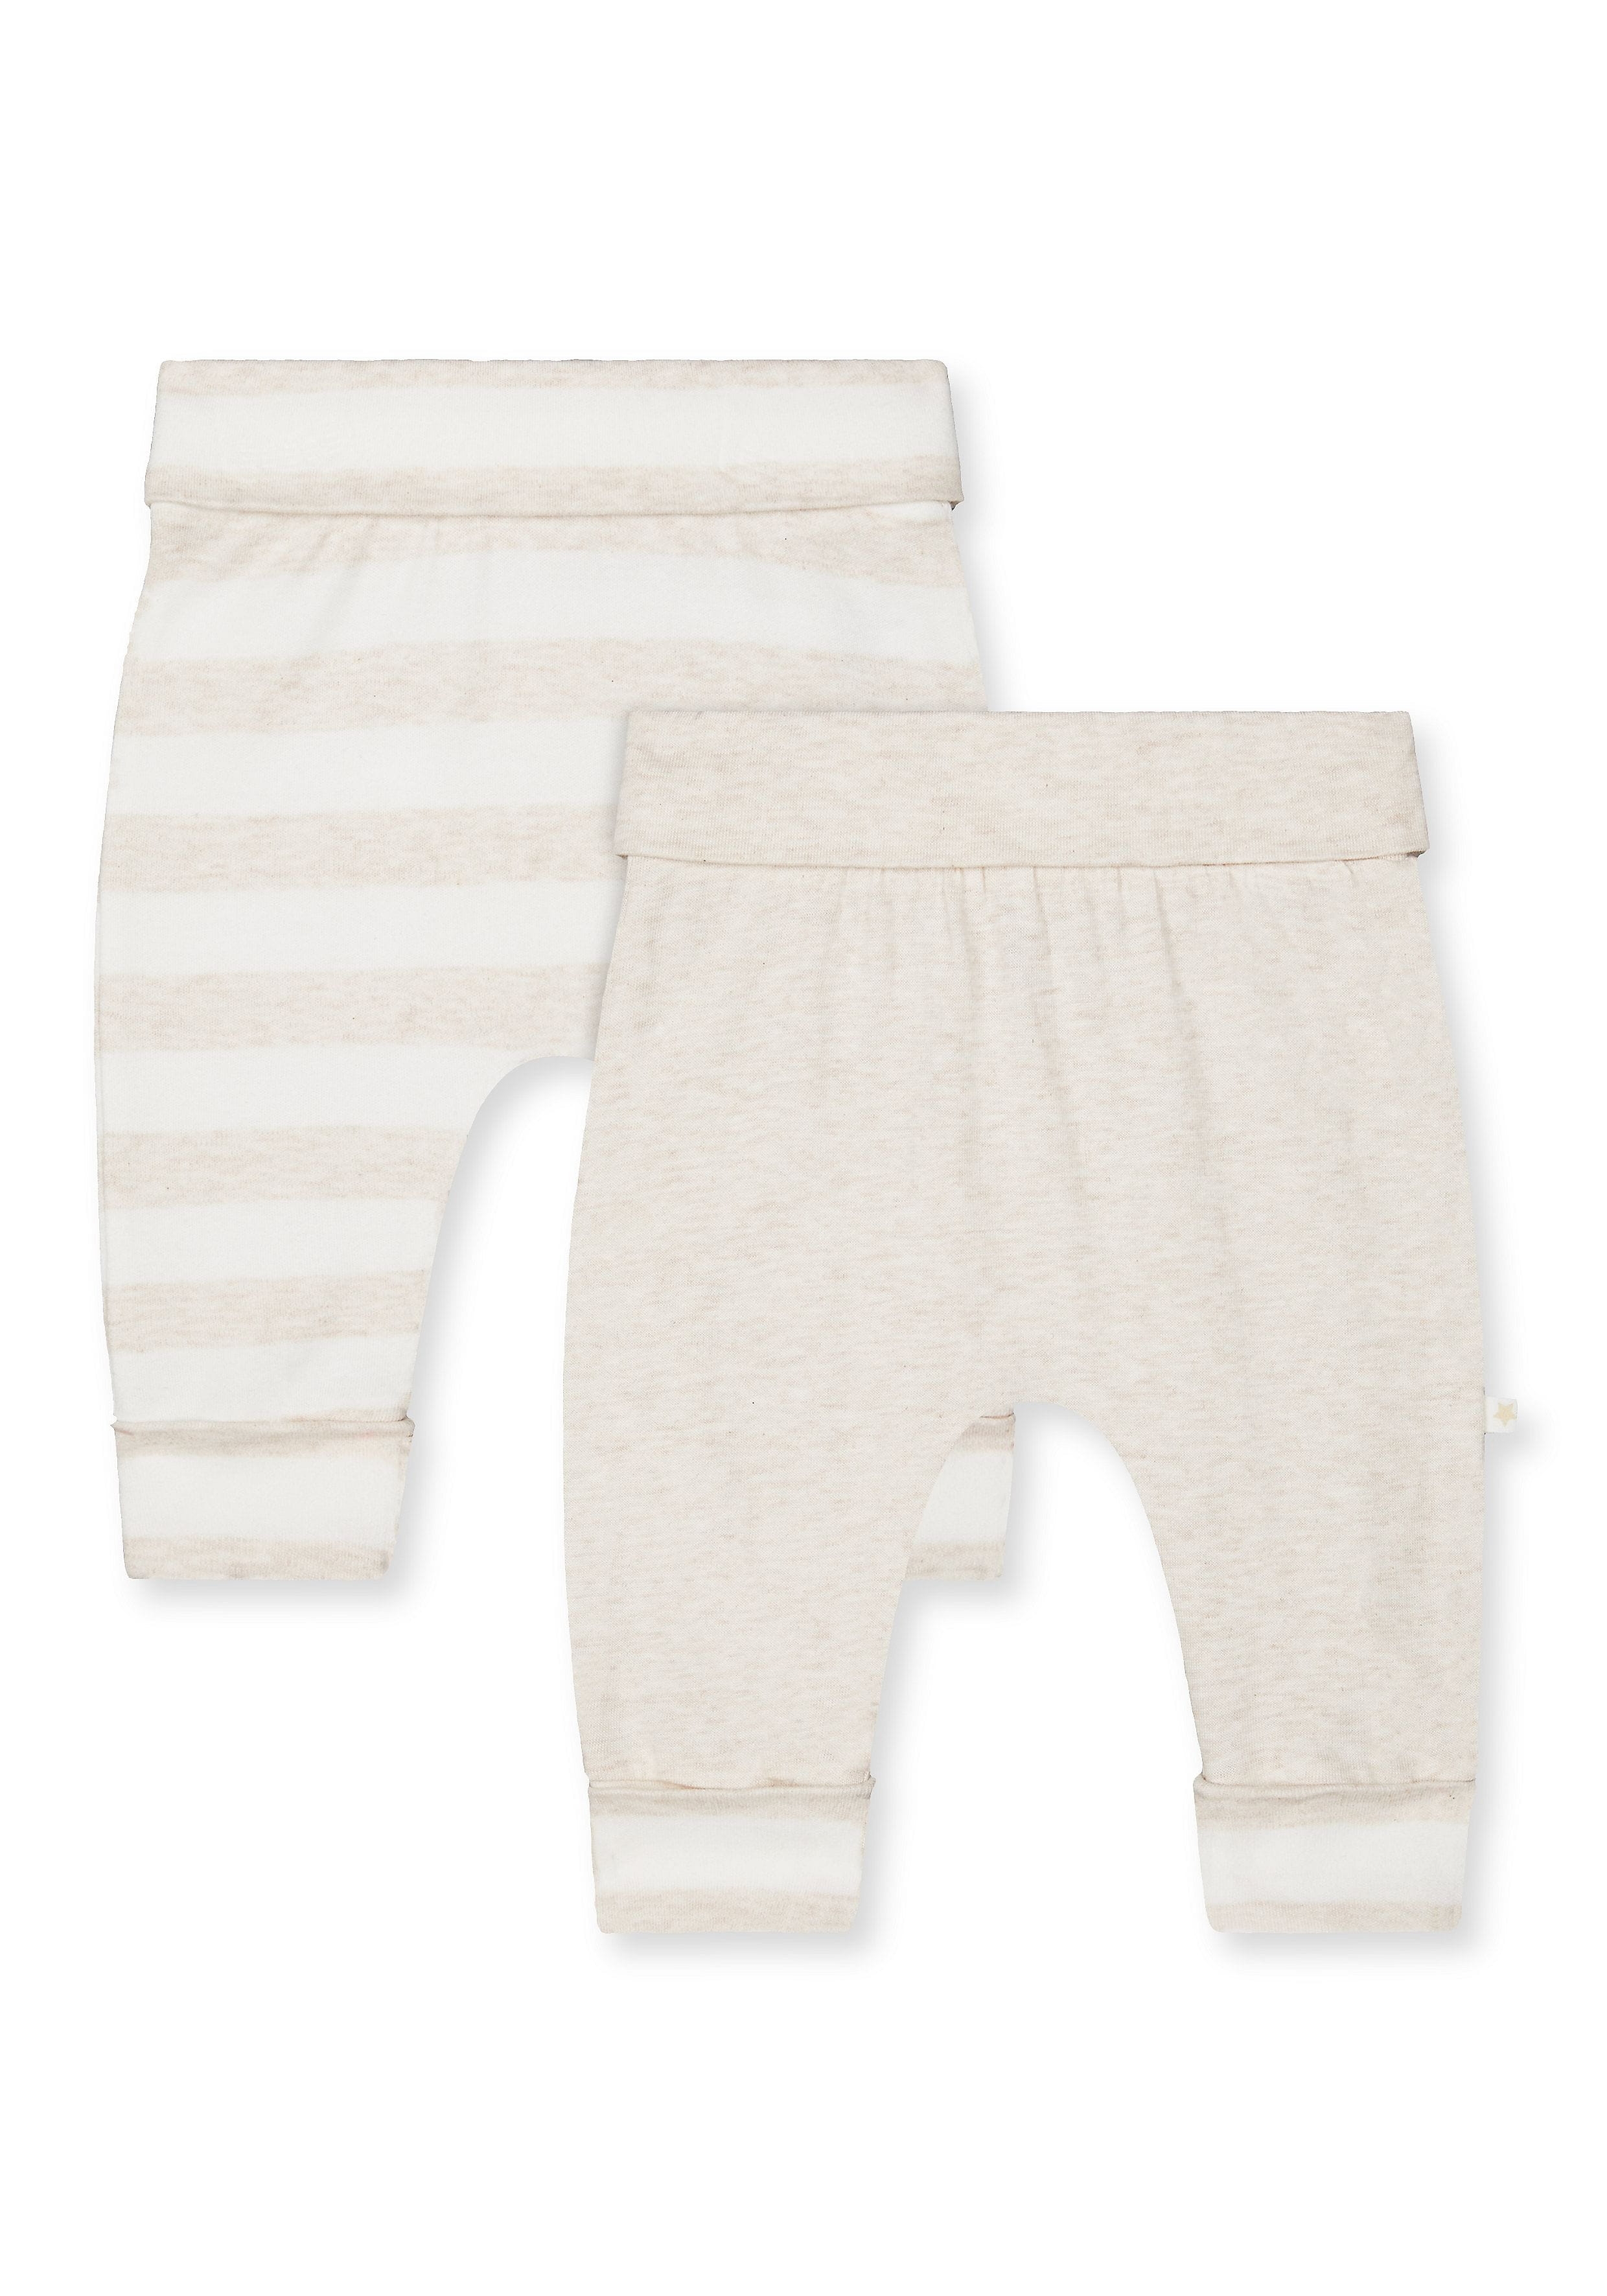 Mothercare | Unisex Joggers Striped - Pack Of 2 - Beige 0